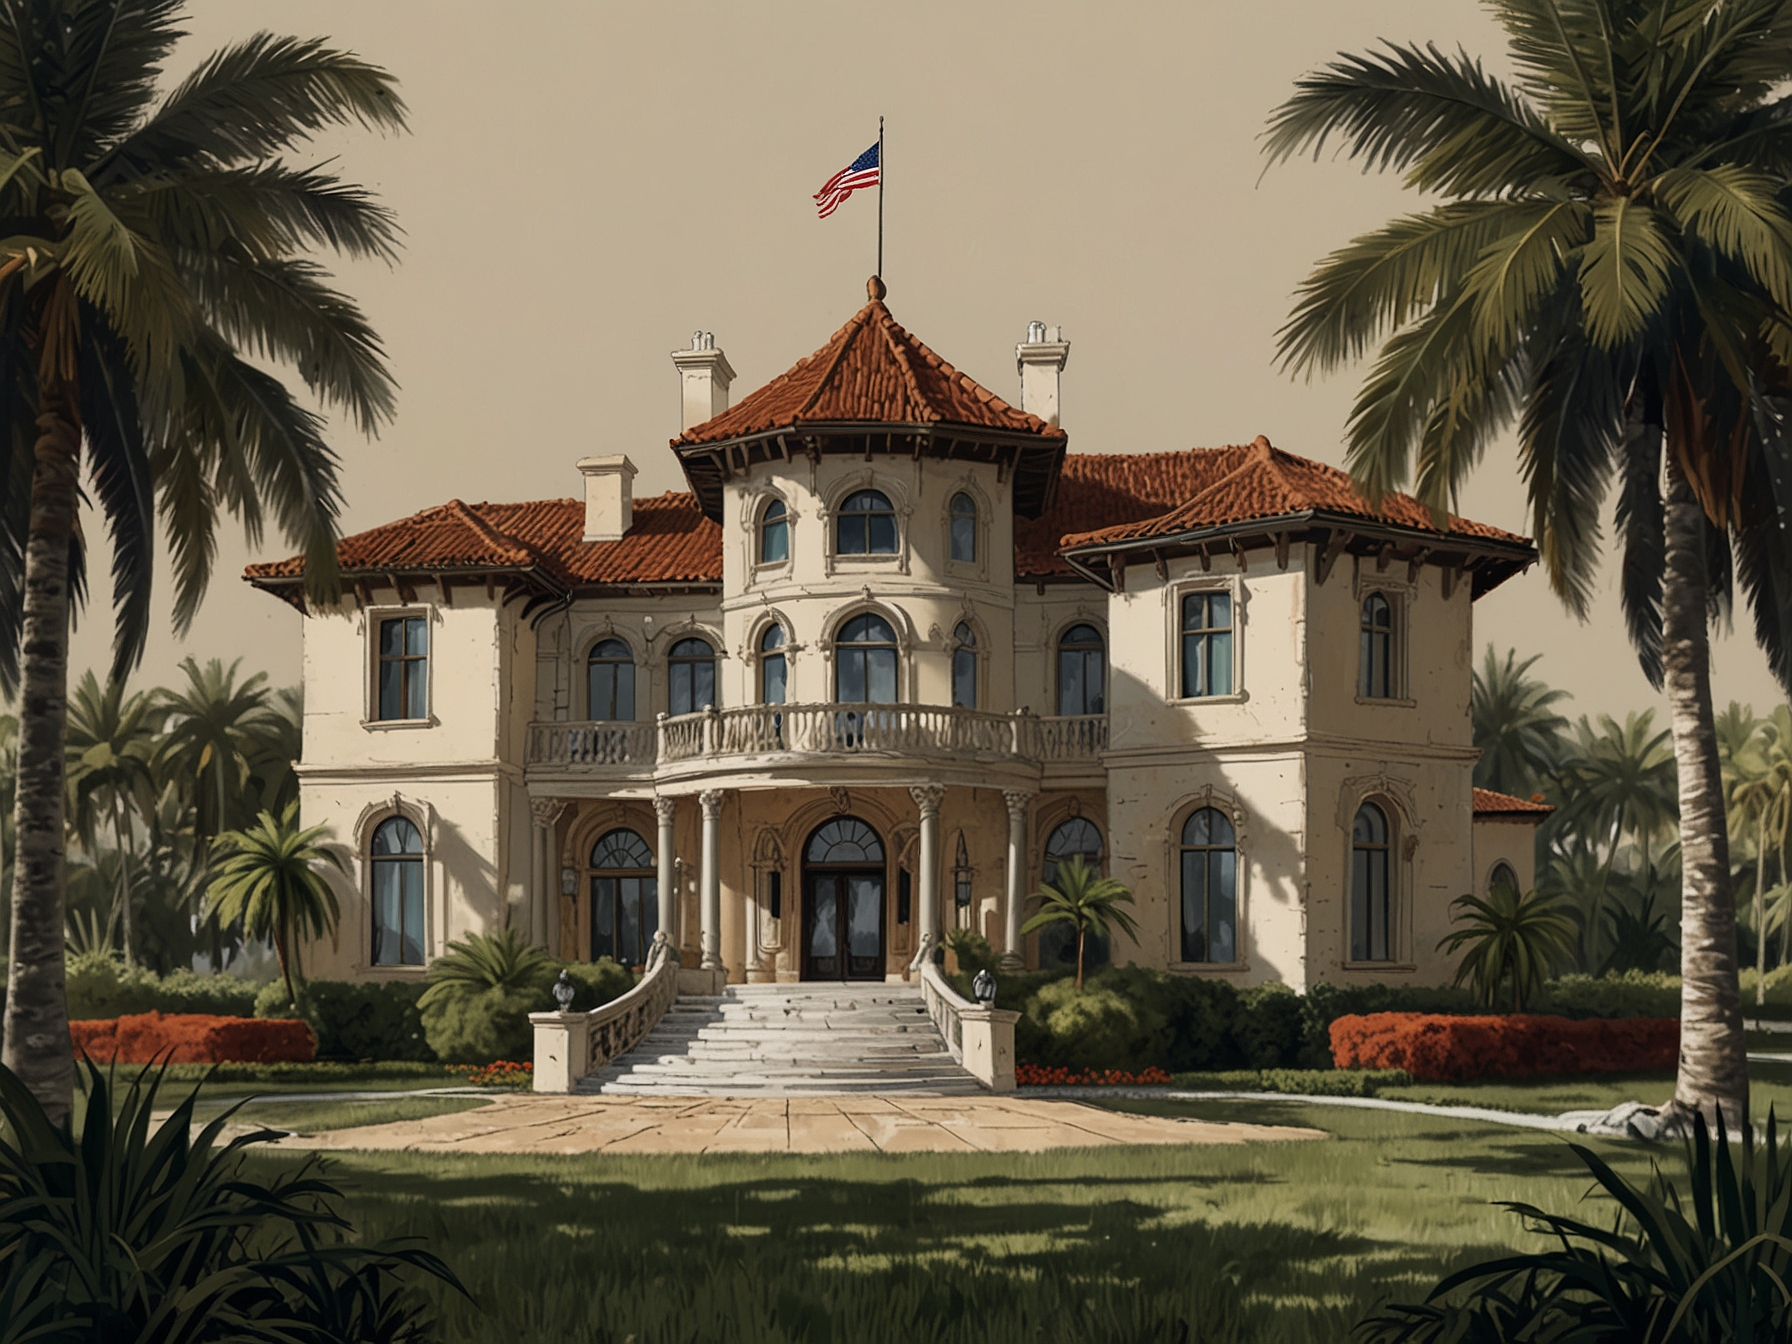 An illustration of Trump's Mar-a-Lago residence with highlighted documents, symbolizing the central issue of classified documents and the legal challenges surrounding their retrieval.